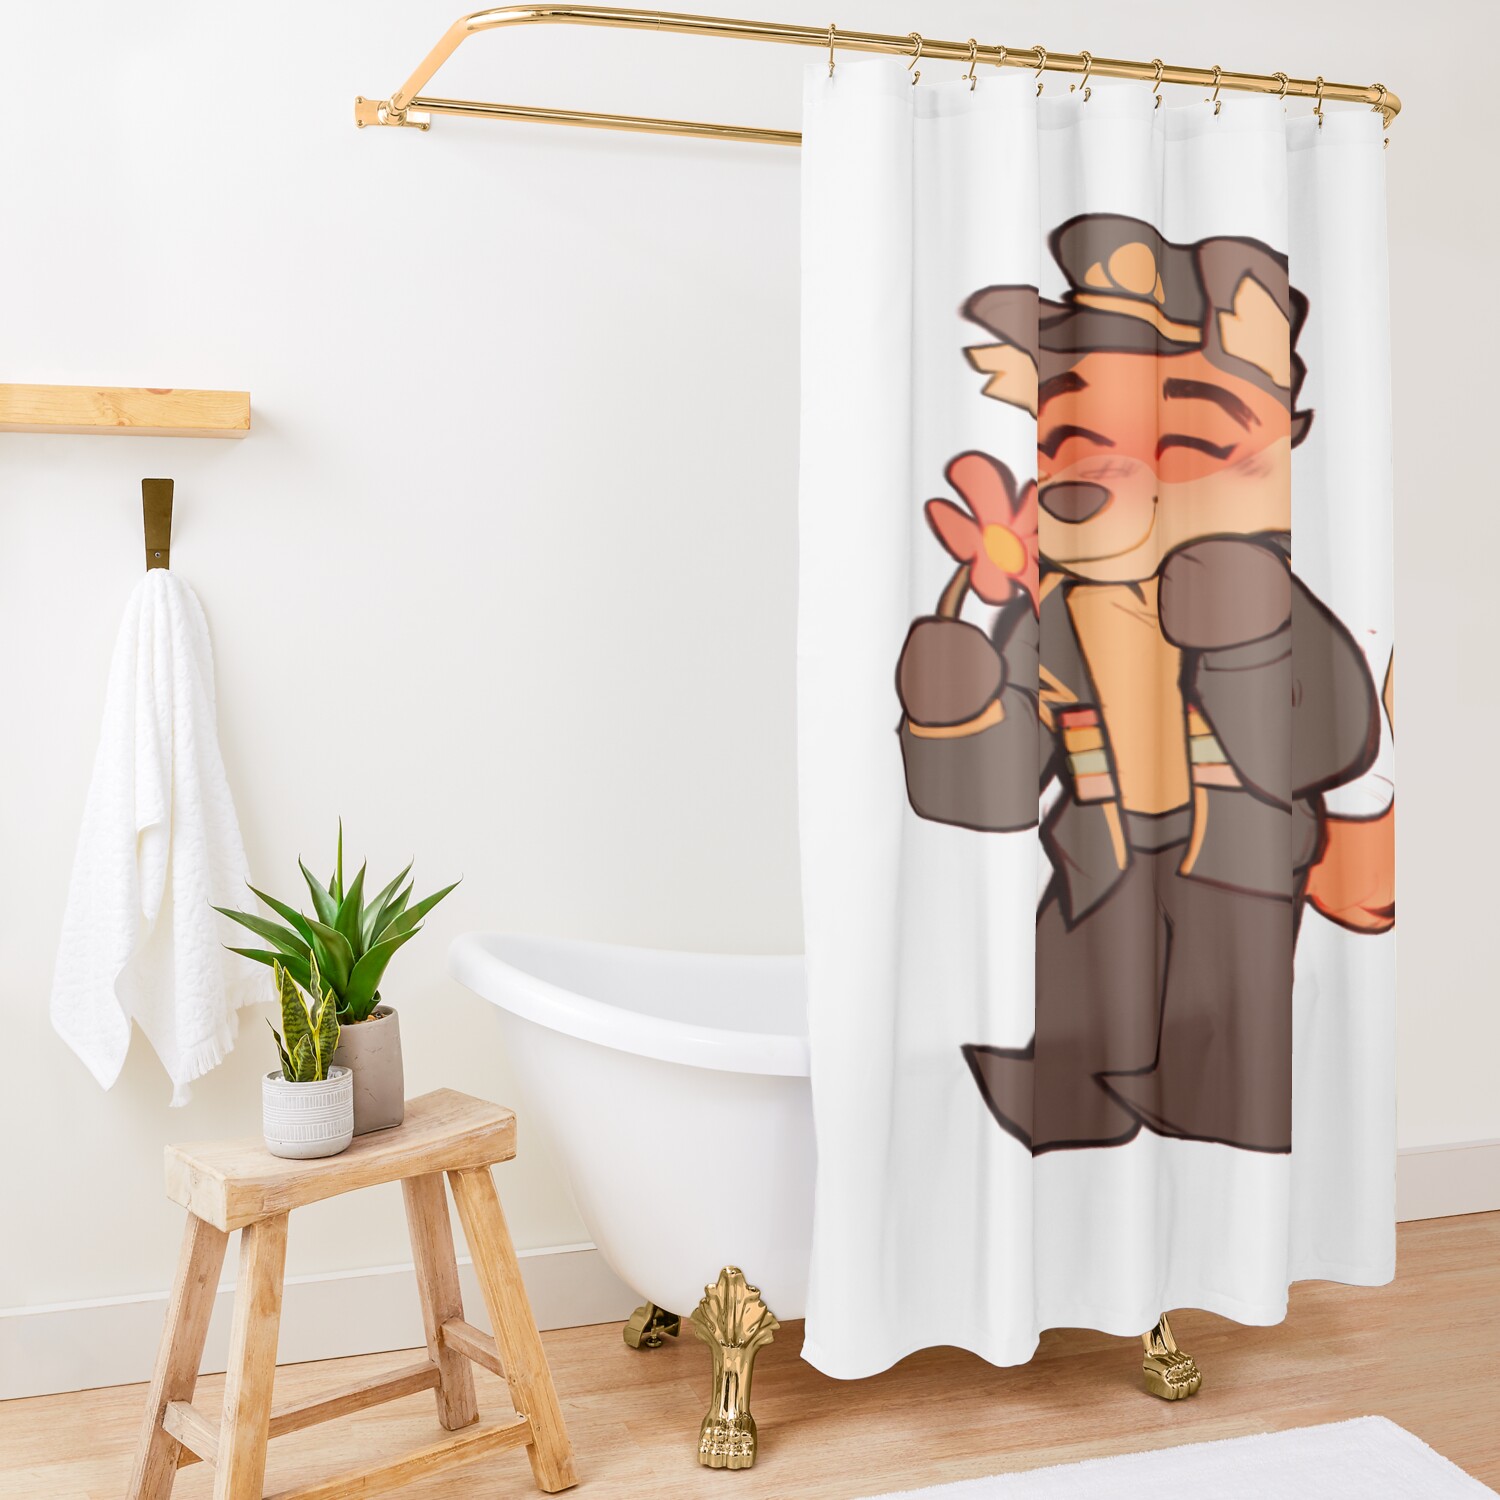 urshower curtain opensquare1500x1500 1 - Fundy Shop